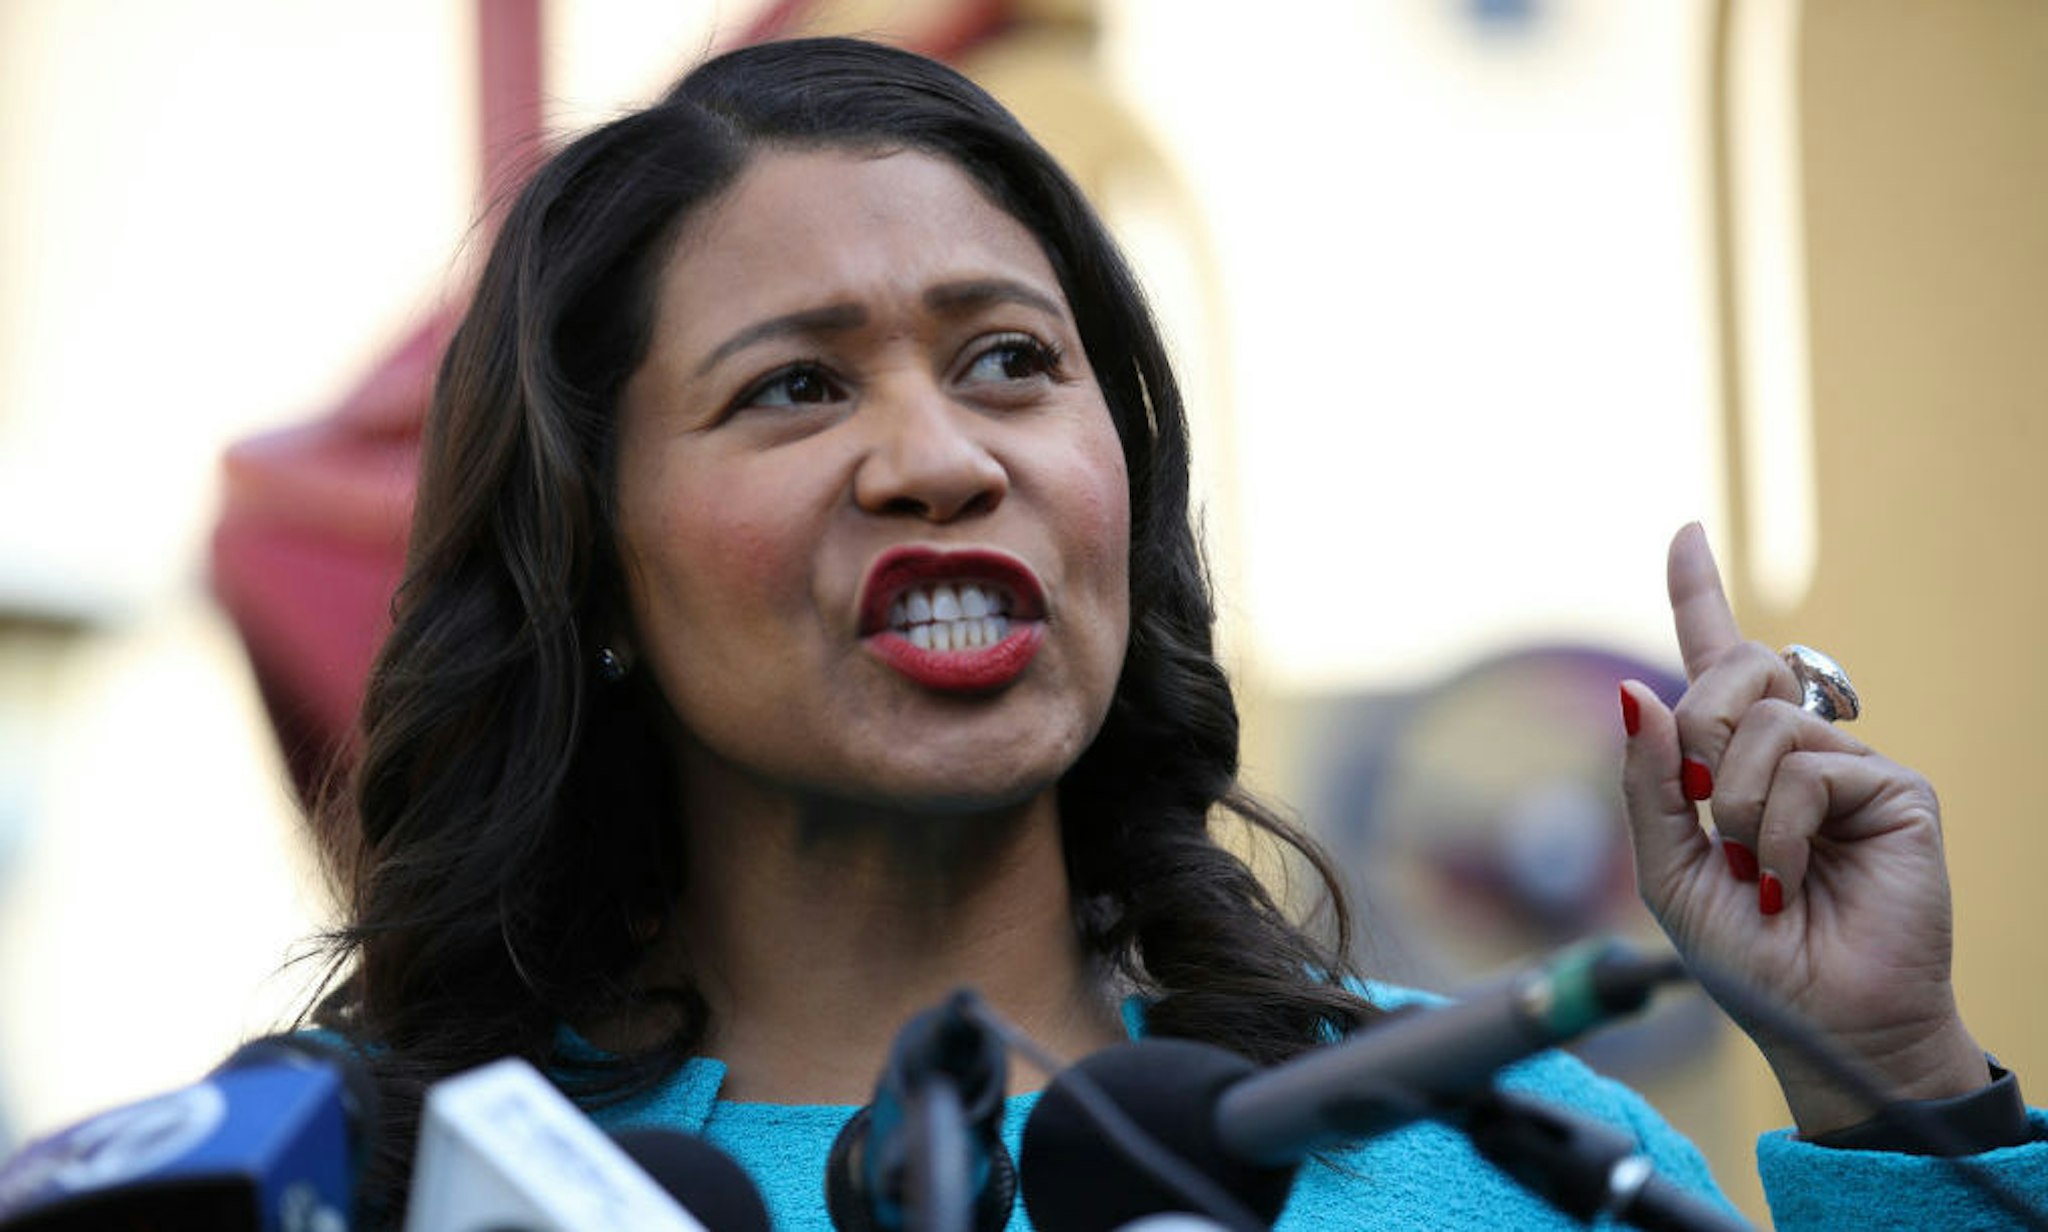 SAN FRANCISCO, CALIFORNIA - NOVEMBER 21: San Francisco mayor London Breed speaks during a press conference at Hamilton Families on November 21, 2019 in San Francisco, California. YouTube CEO Susan Wojcicki and her husband Dennis Troper joined Breed and Google.org representatives to announce that they would be donating a combined $1.35 million to Hamilton Families, a San Francisco based non-profit that provides long-term housing solutions to homeless families.